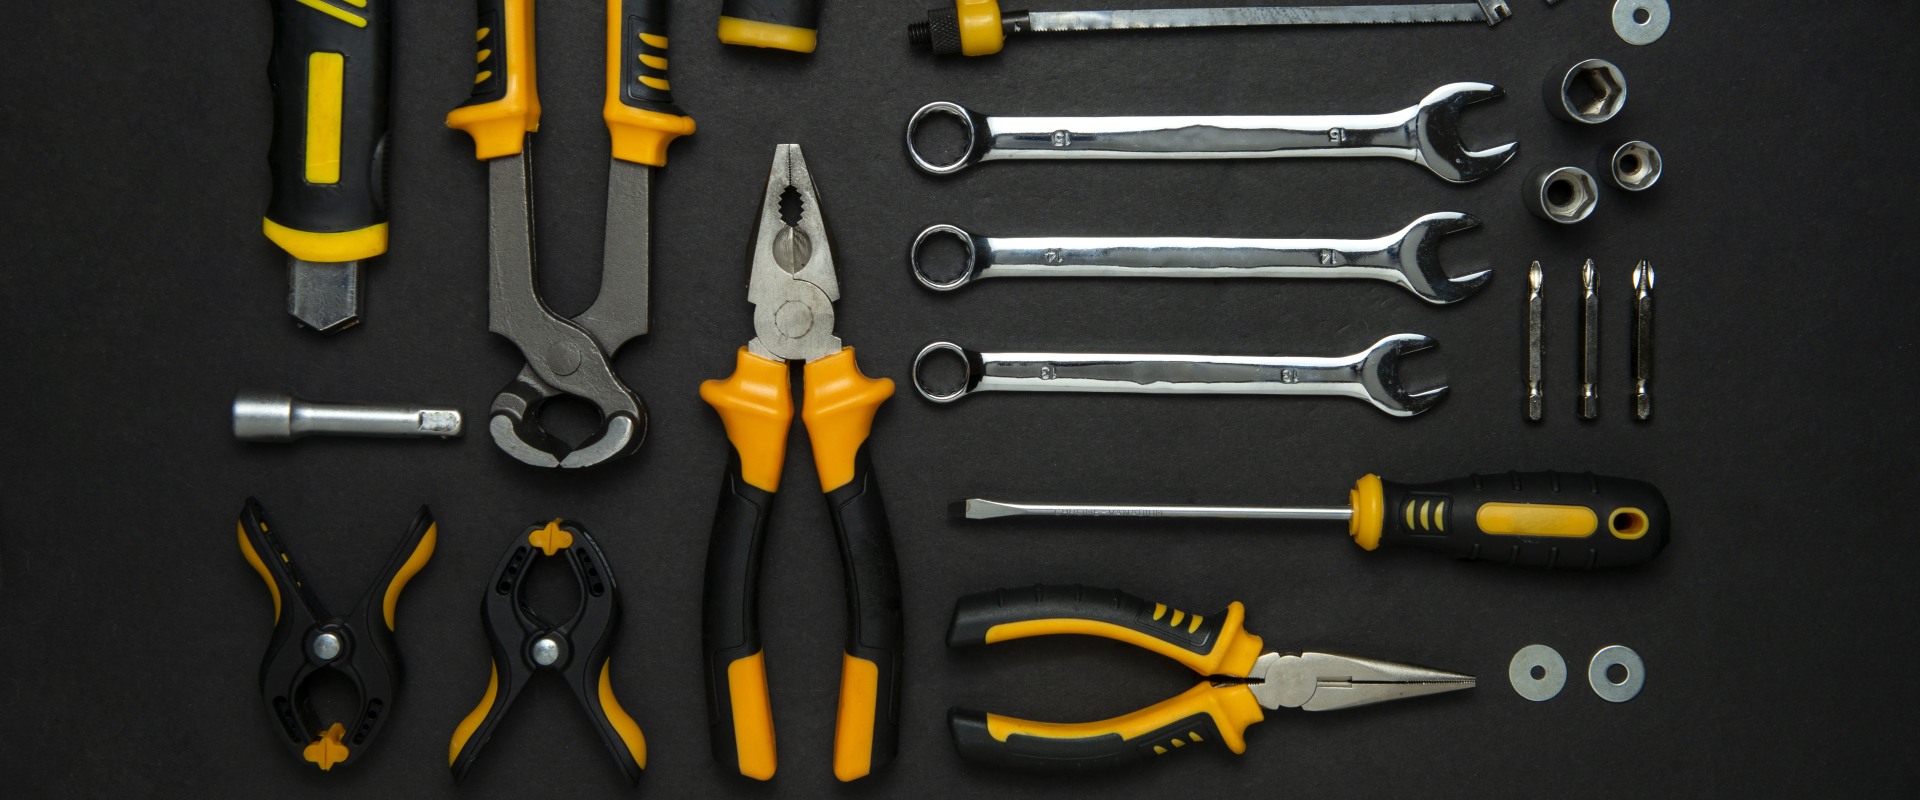 Tool kits and Wrenches: A Comprehensive Overview